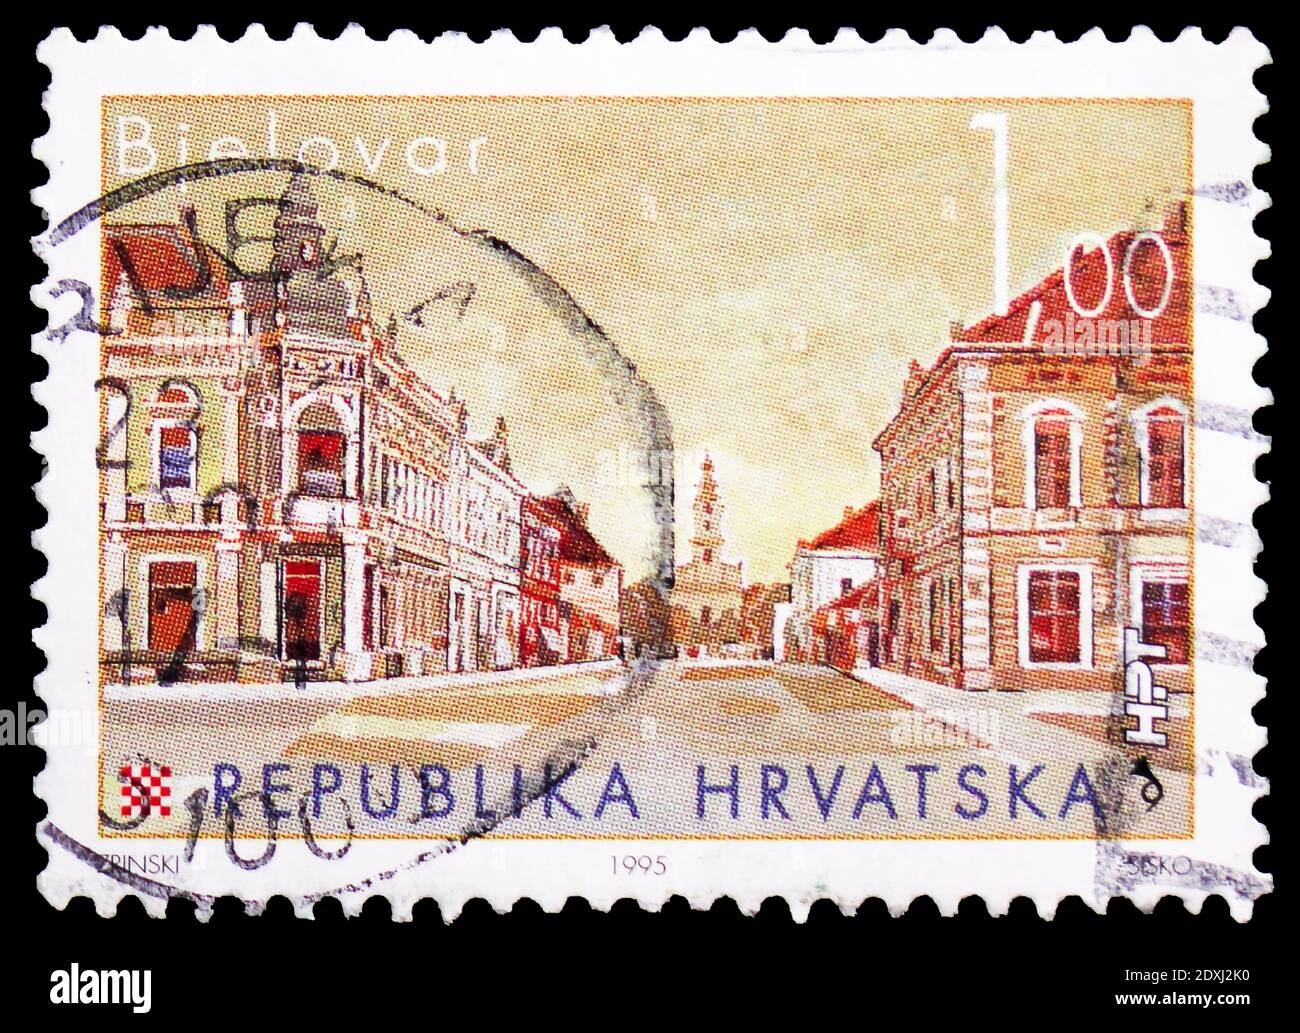 MOSCOW, RUSSIA - MARCH 23, 2019: Postage stamp printed in Croatia shows Zagrebacka Street, Bjelovar, Croatian Towns (III) serie, circa Stock Photo